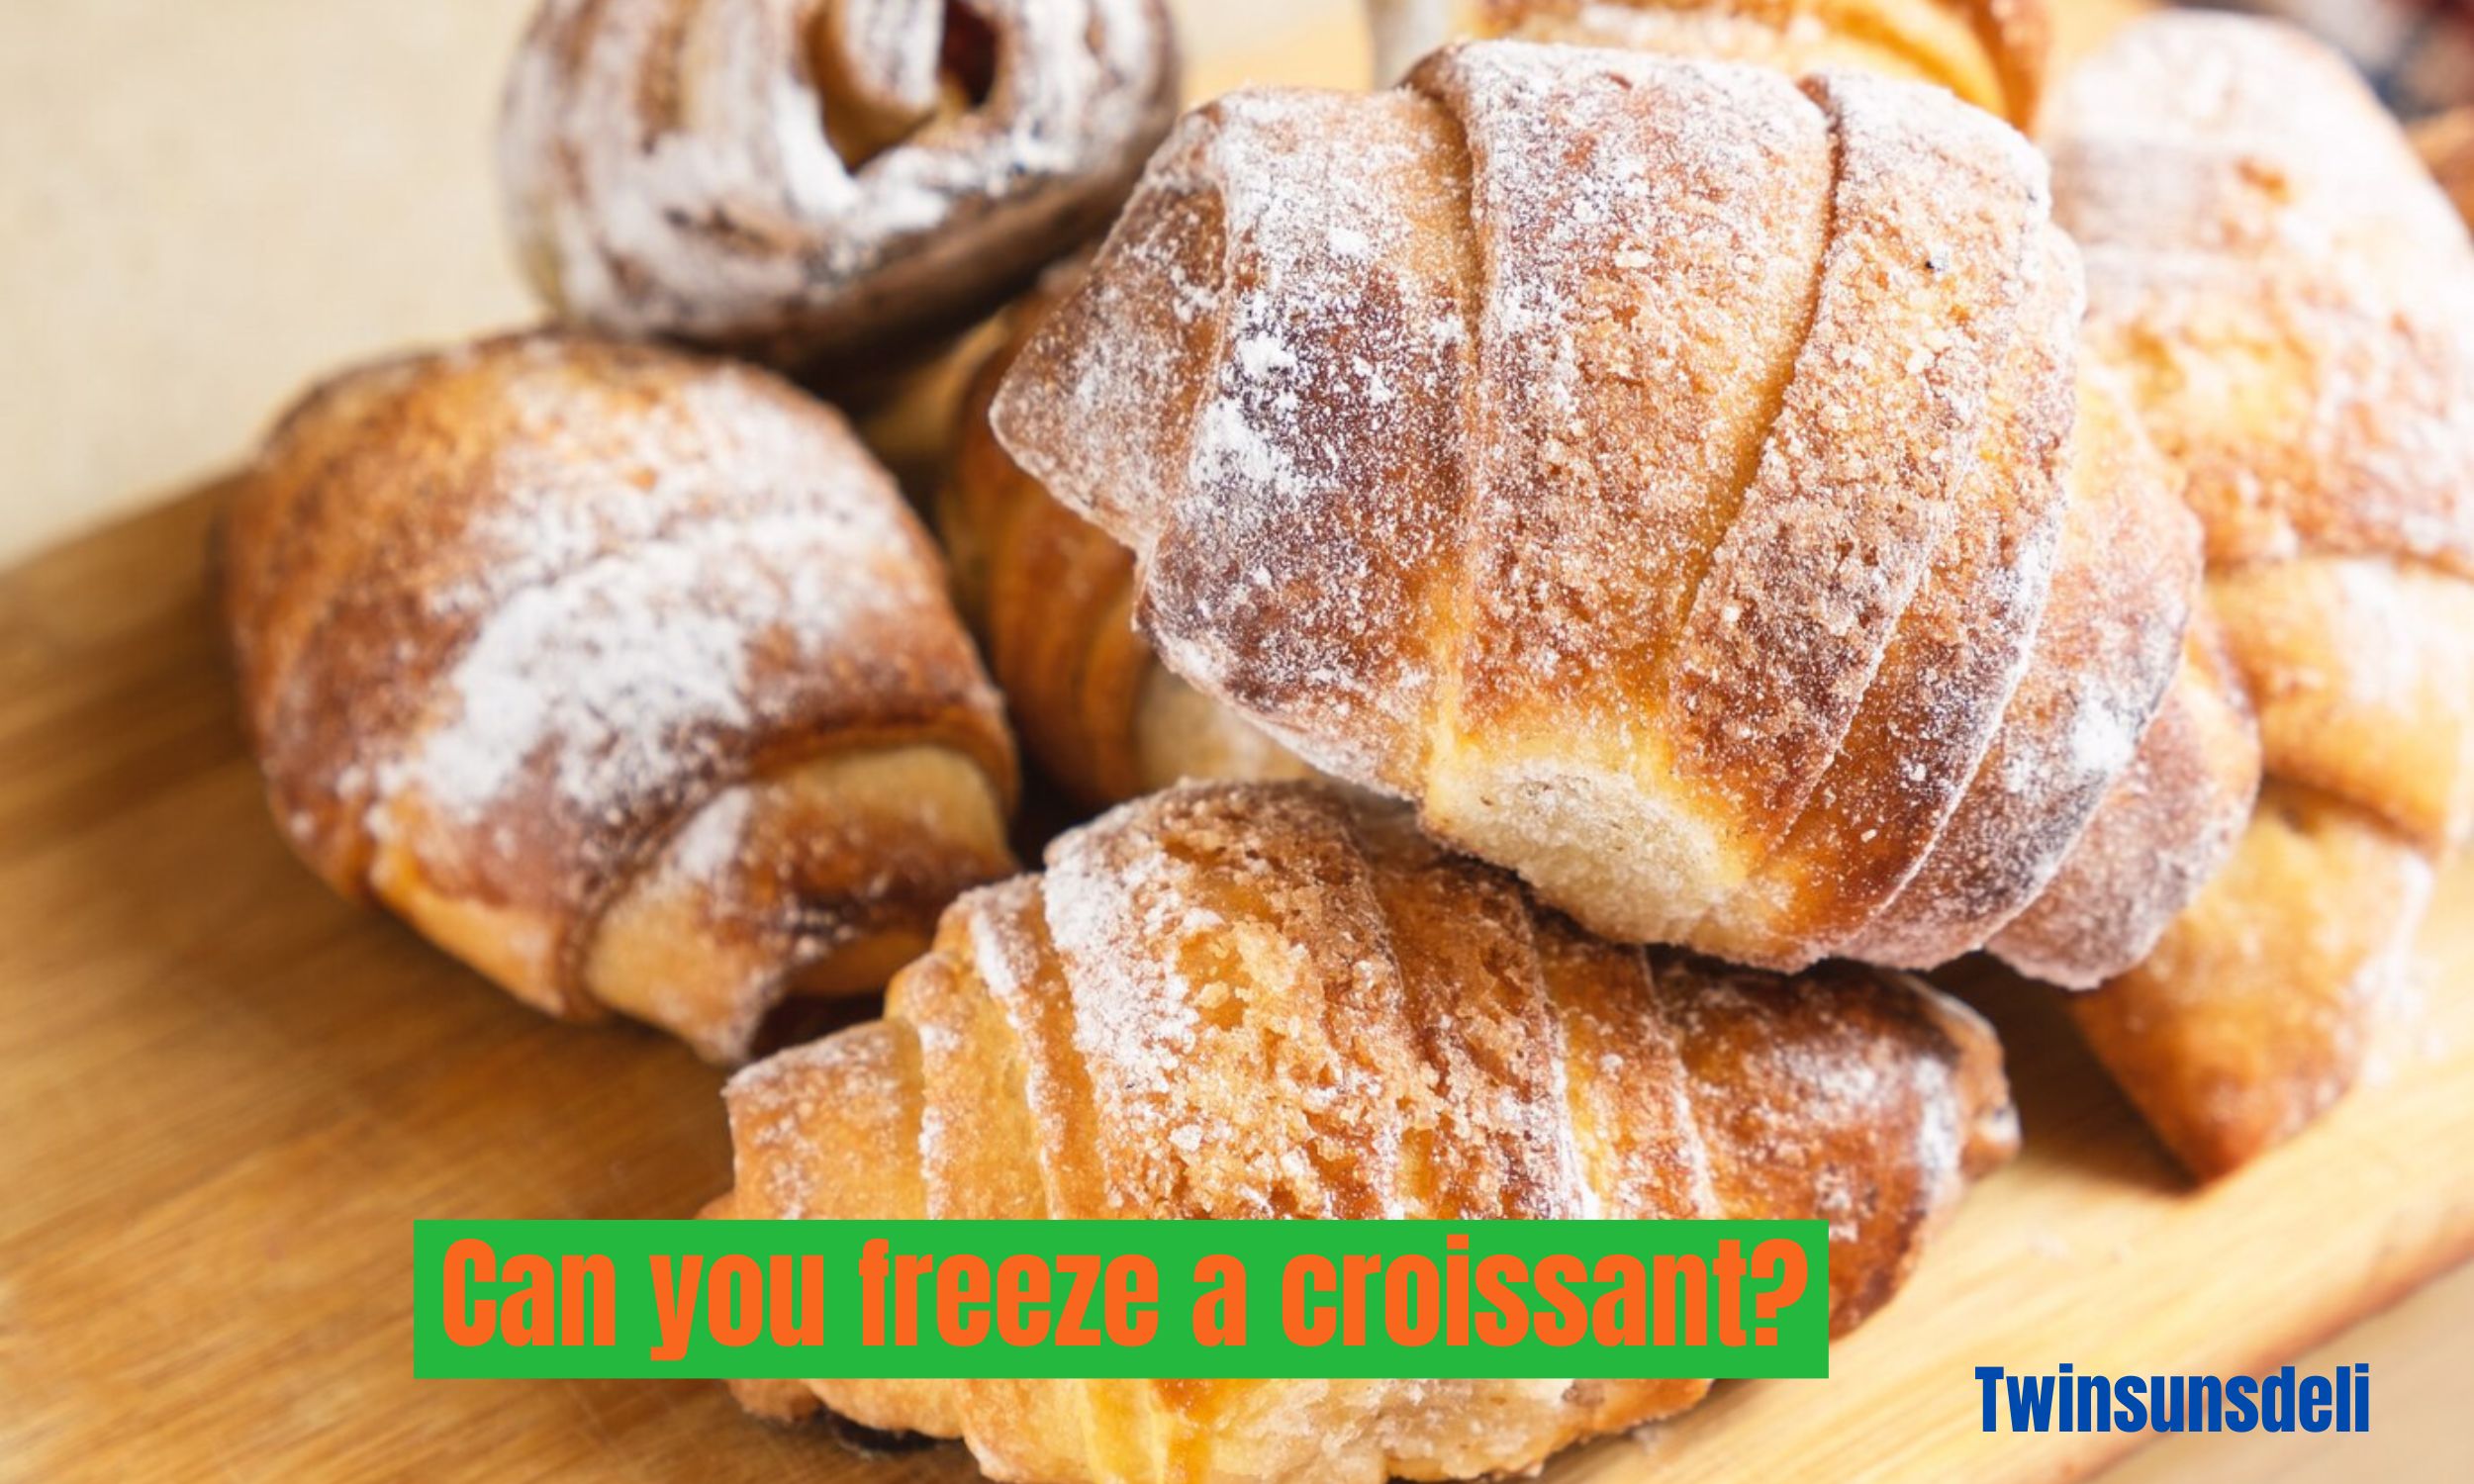 Can you freeze a croissant?